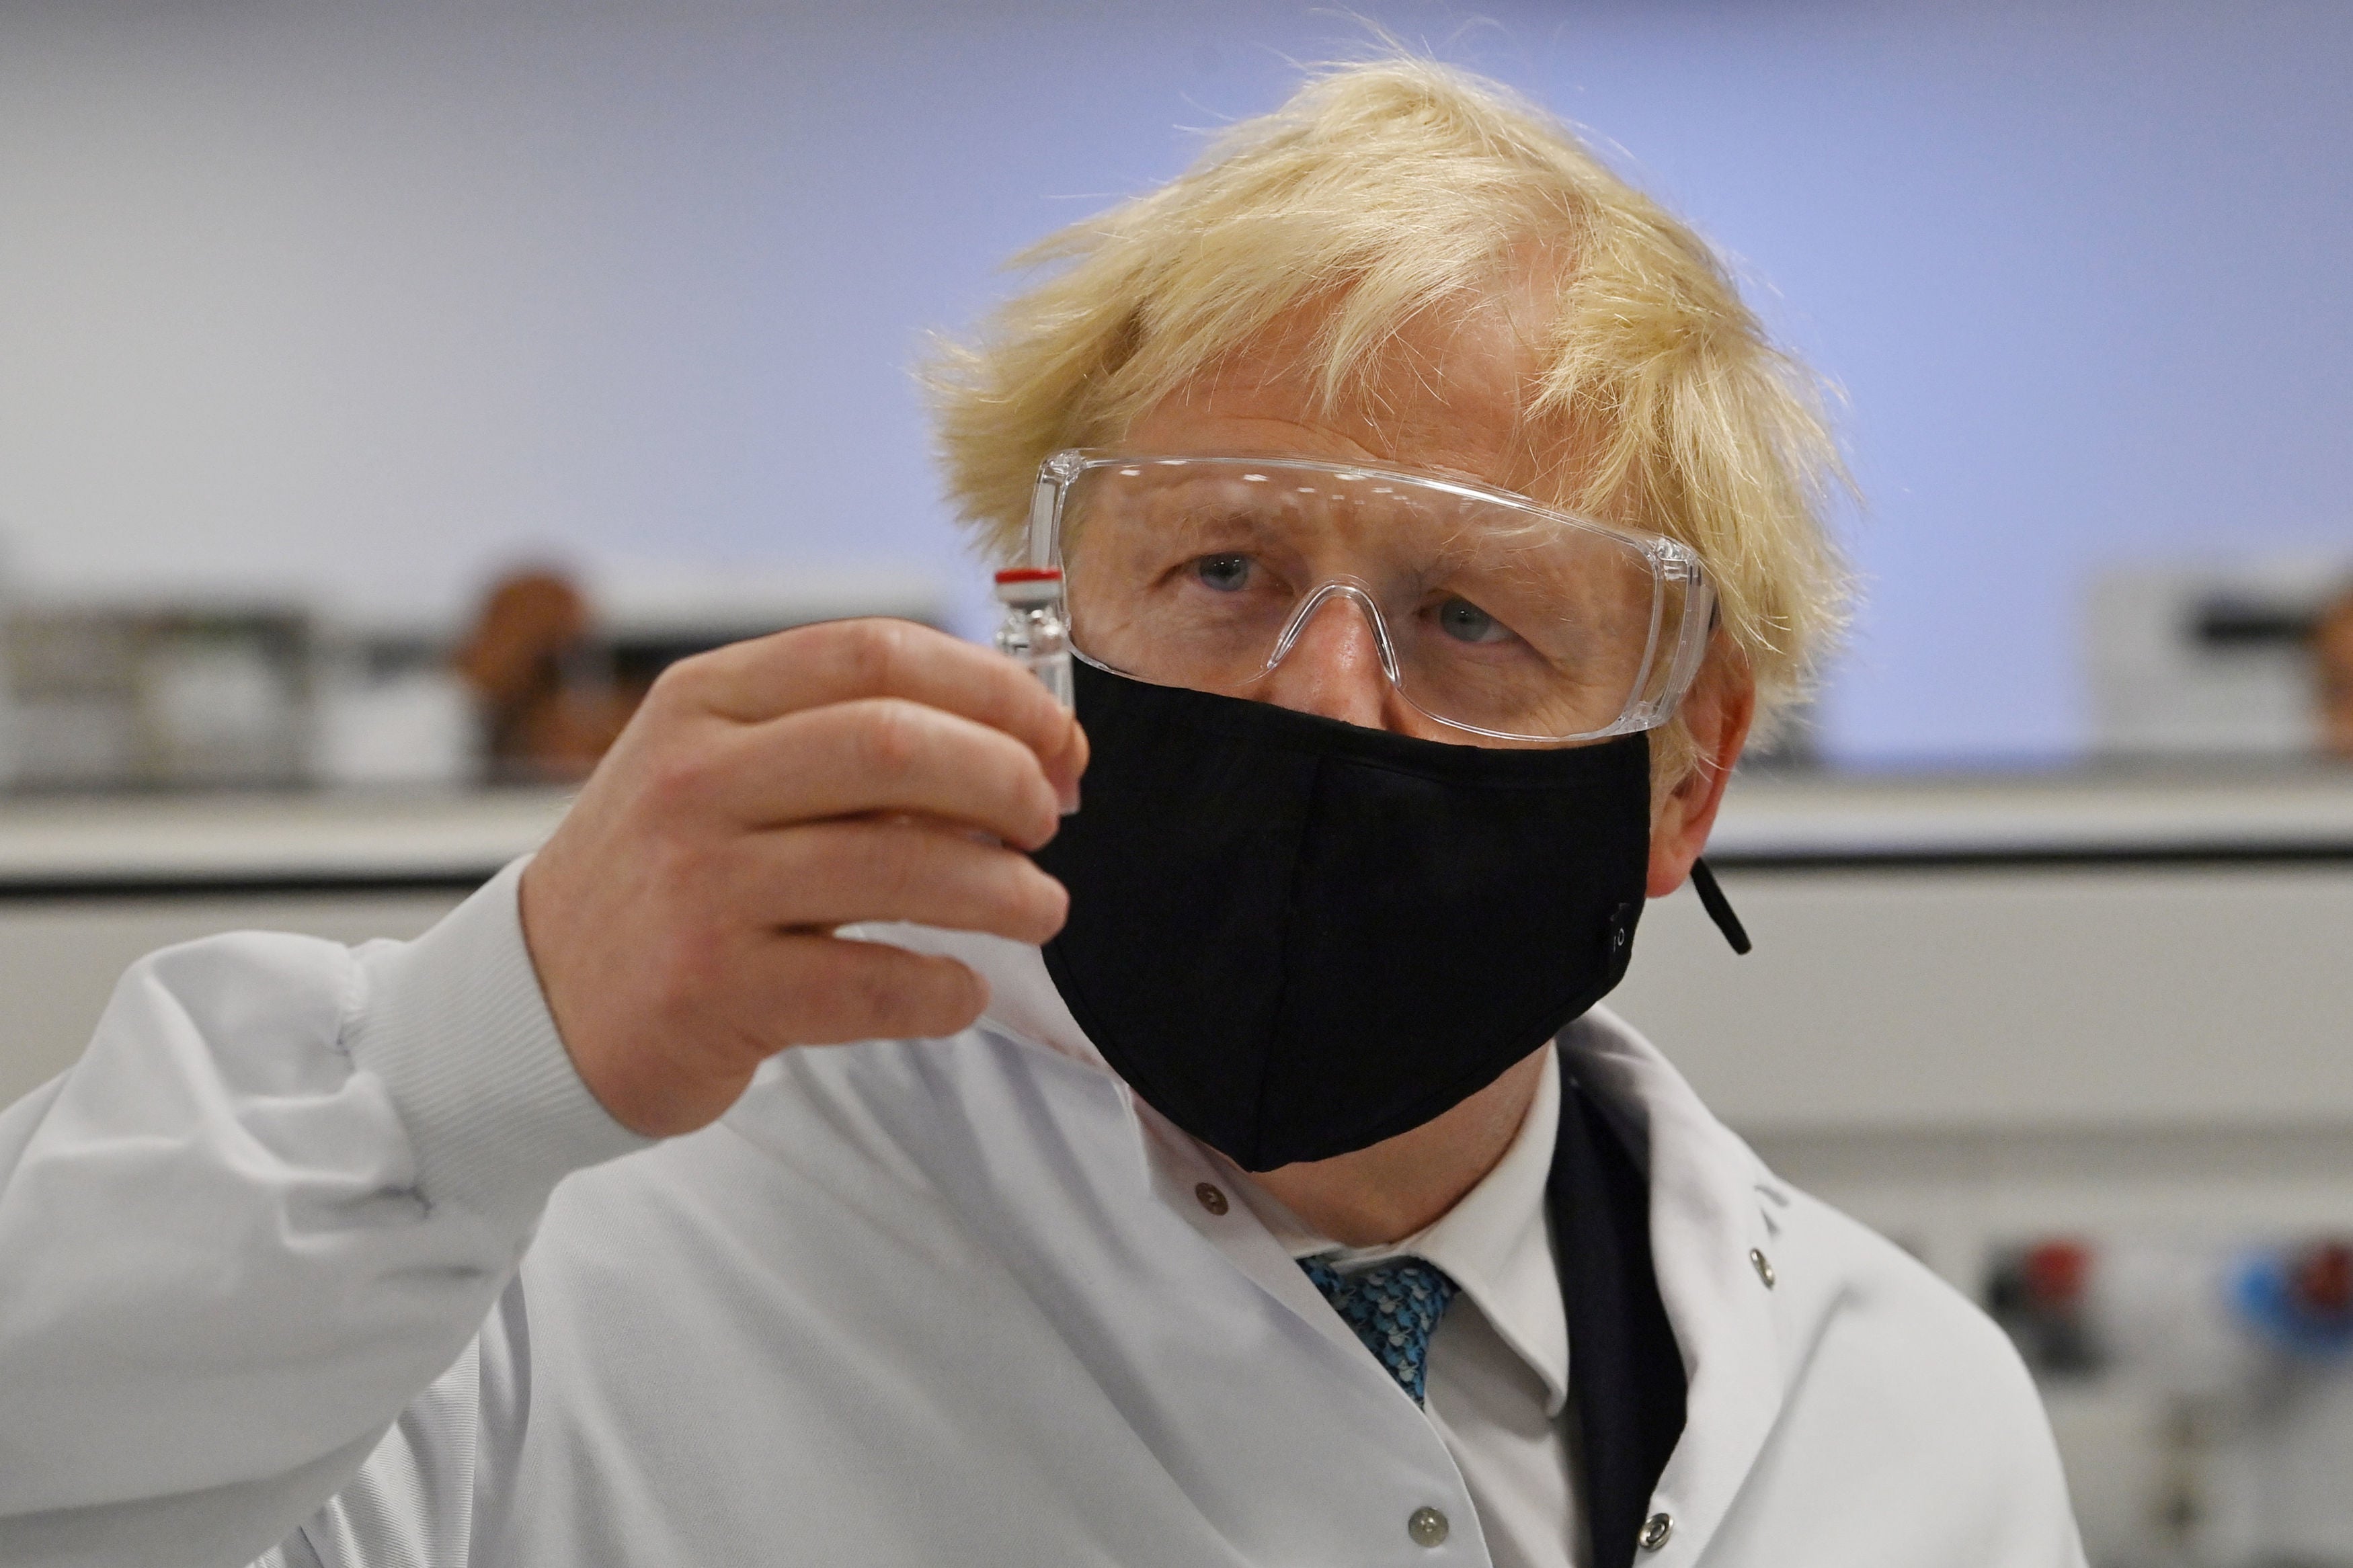 Covid UK news – live: Boris Johnson fails to quell tier restrictions rebellion as vaccine pass plan rejected - The Independent